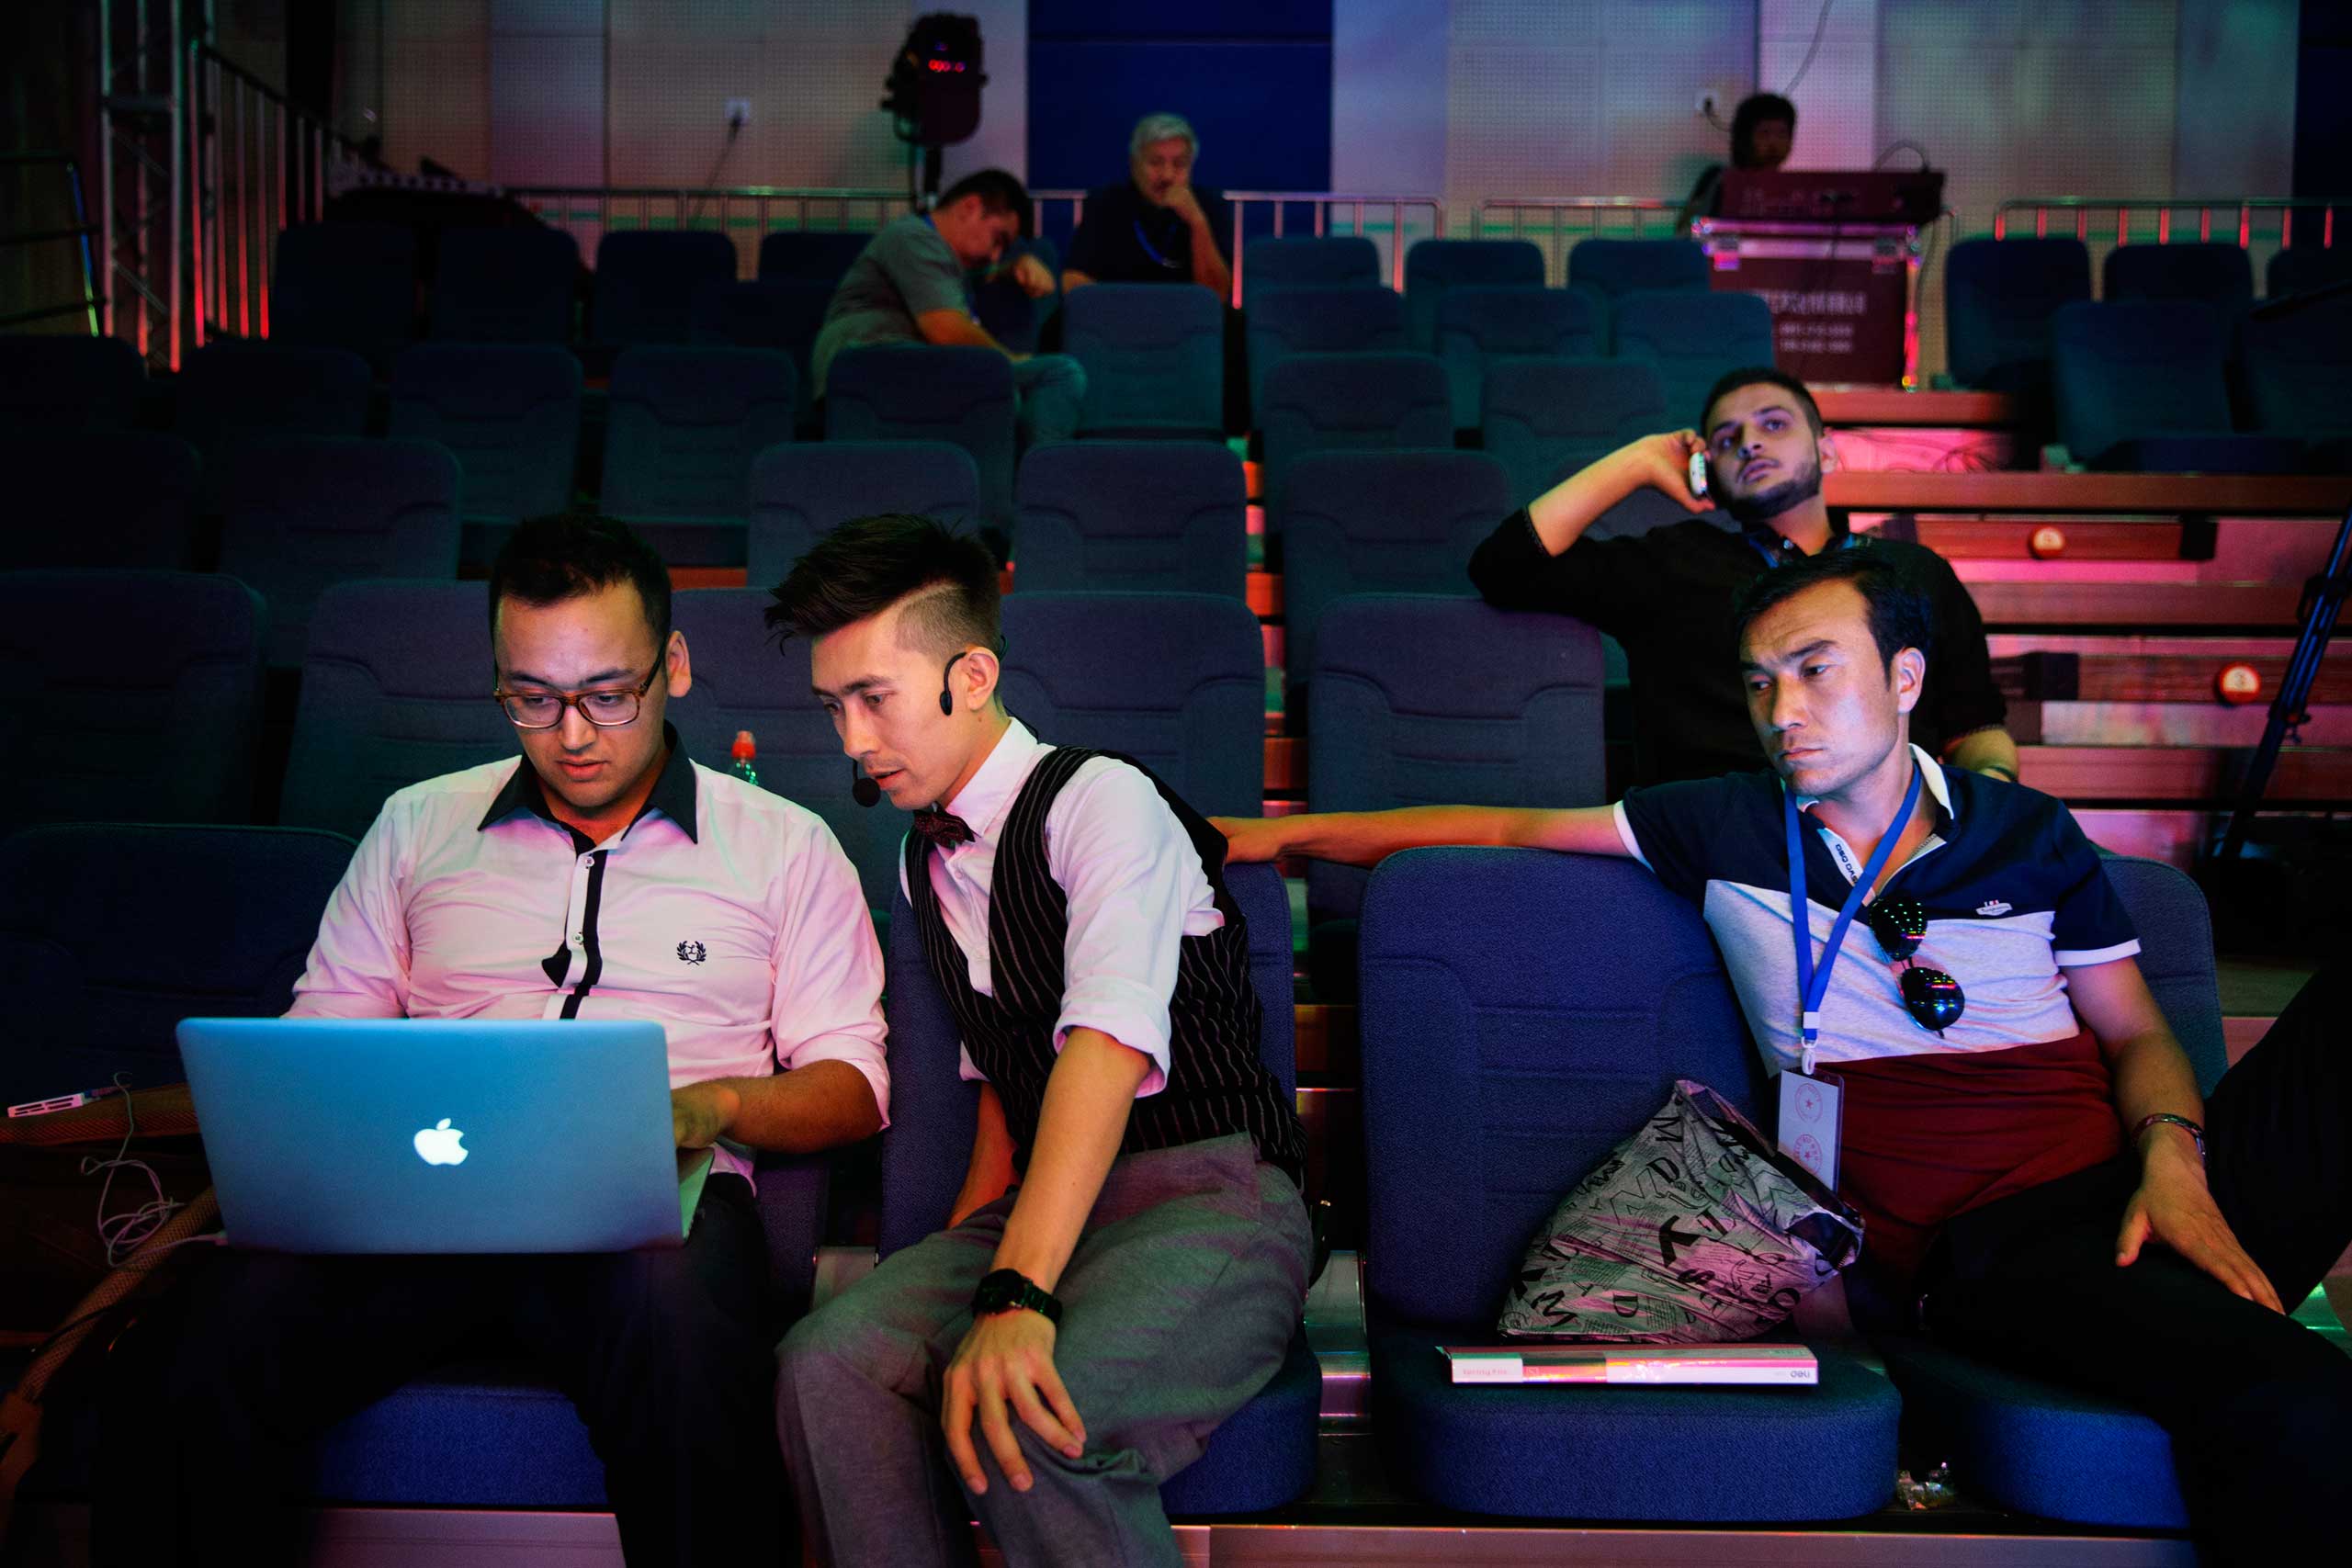 Ablajan checks a video on a laptop at rehearsals for a planned live webcast concert scheduled for that afternoon in Urumqi, China on July 31, 2014.